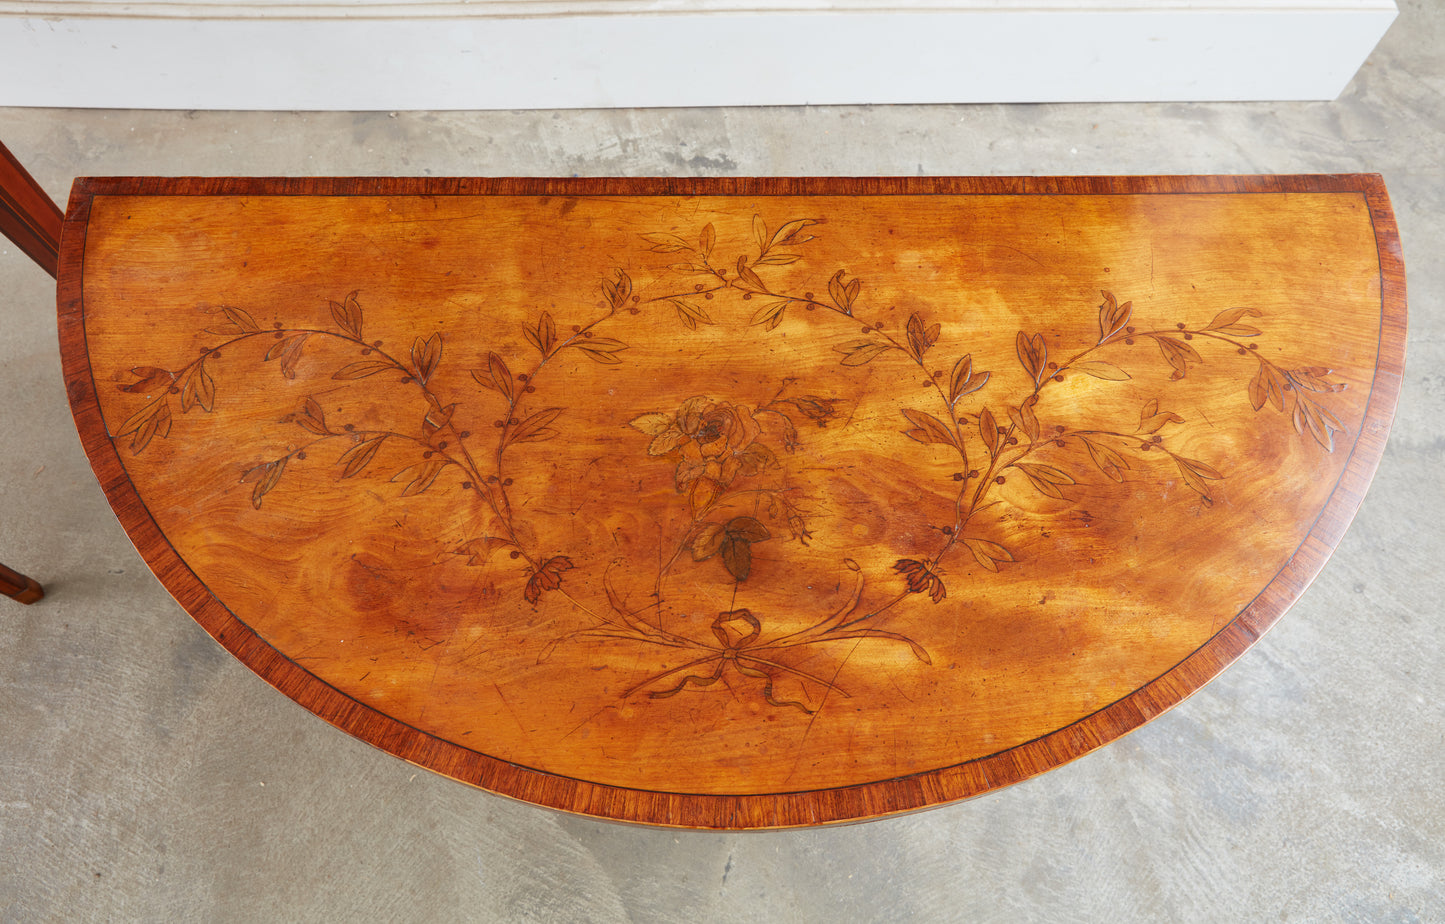 SATINWOOD DEMI-LUNE CARD TABLES c. 1775